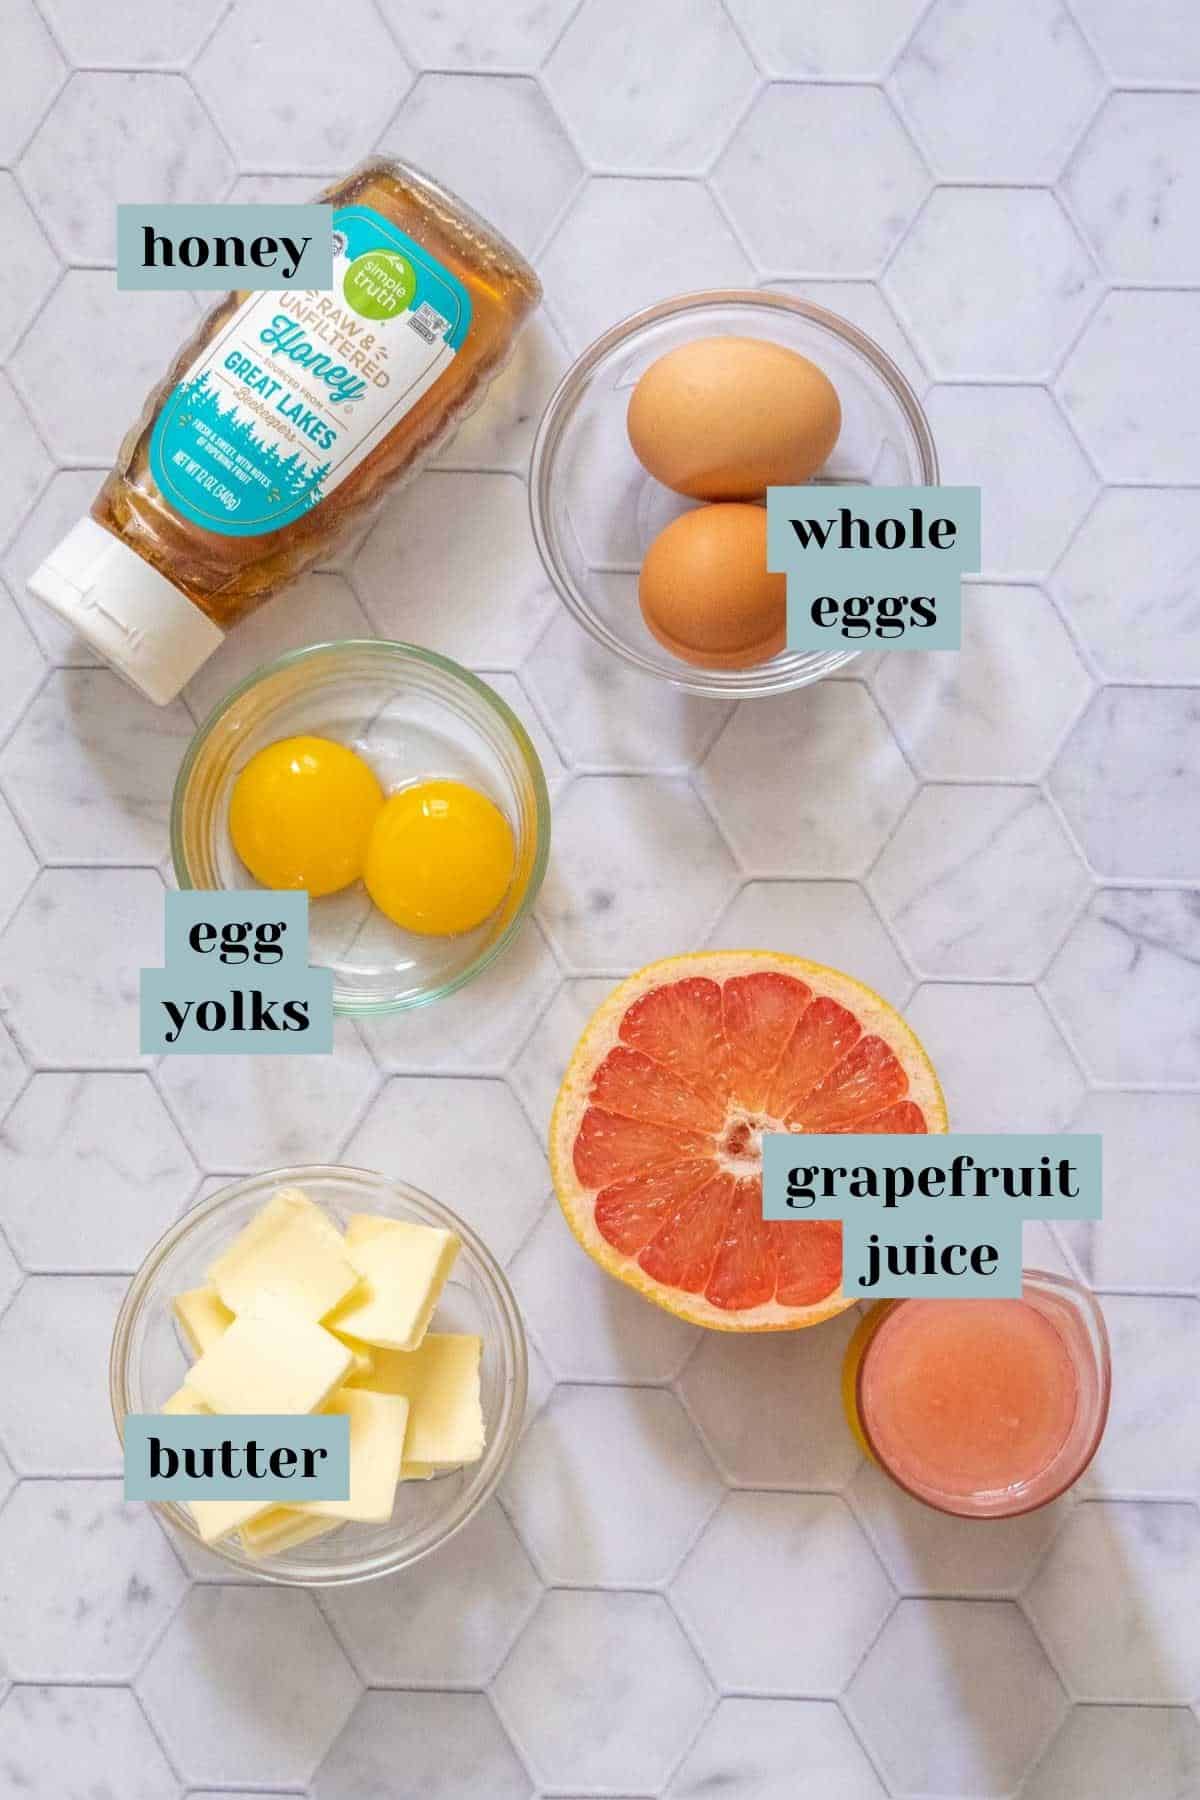 Ingredients for grapefruit curd on a tile surface with labels.